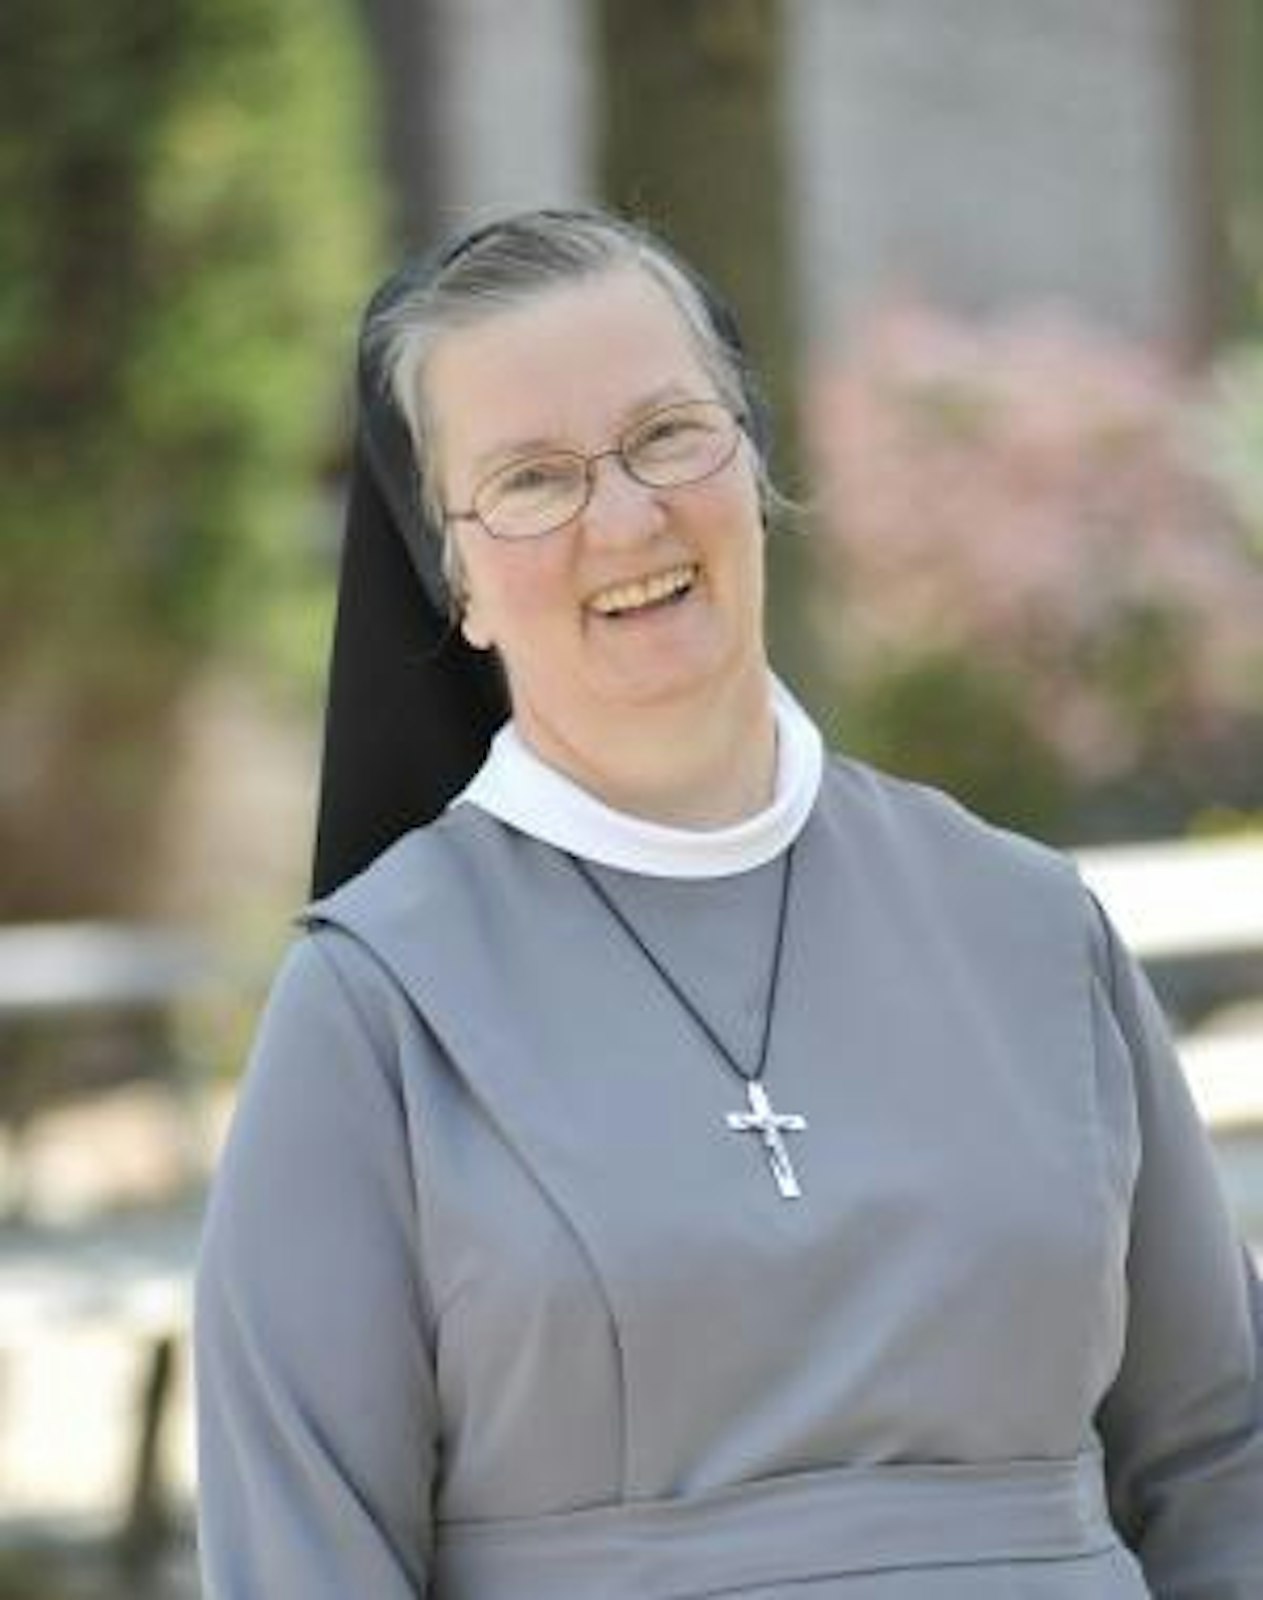 Sr. M. Johanna Paruch, FSGM, Ph.D., professor of theology at the Franciscan University of Steubenville, was the keynote speaker for the conference.  (Courtesy of Franciscan University of Steubenville)